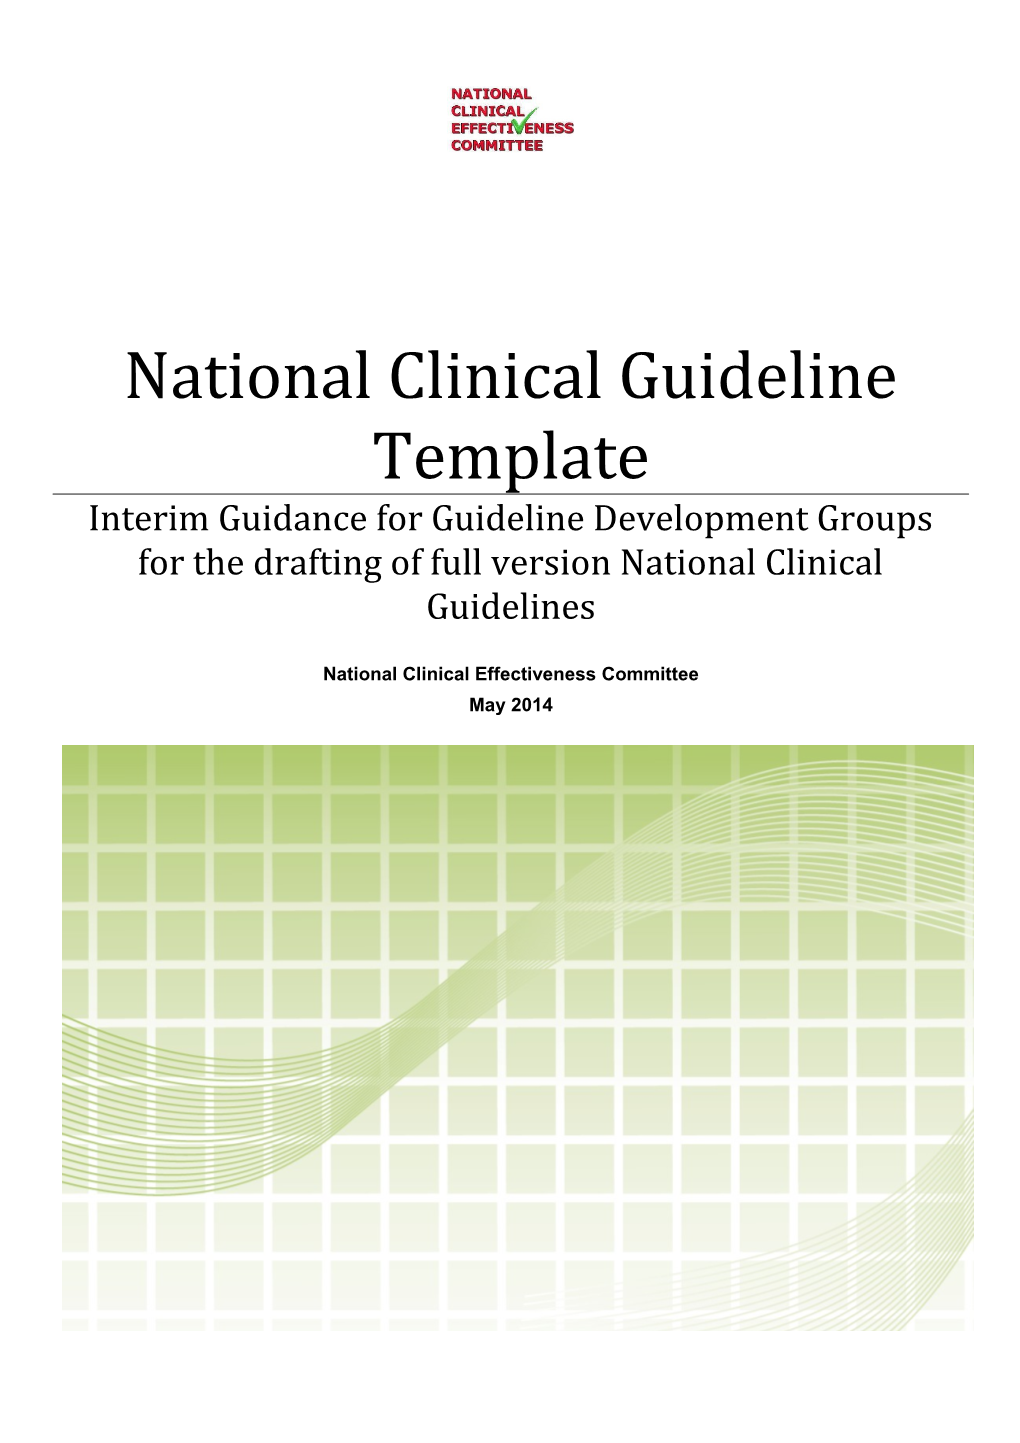 National Clinical Guideline Template